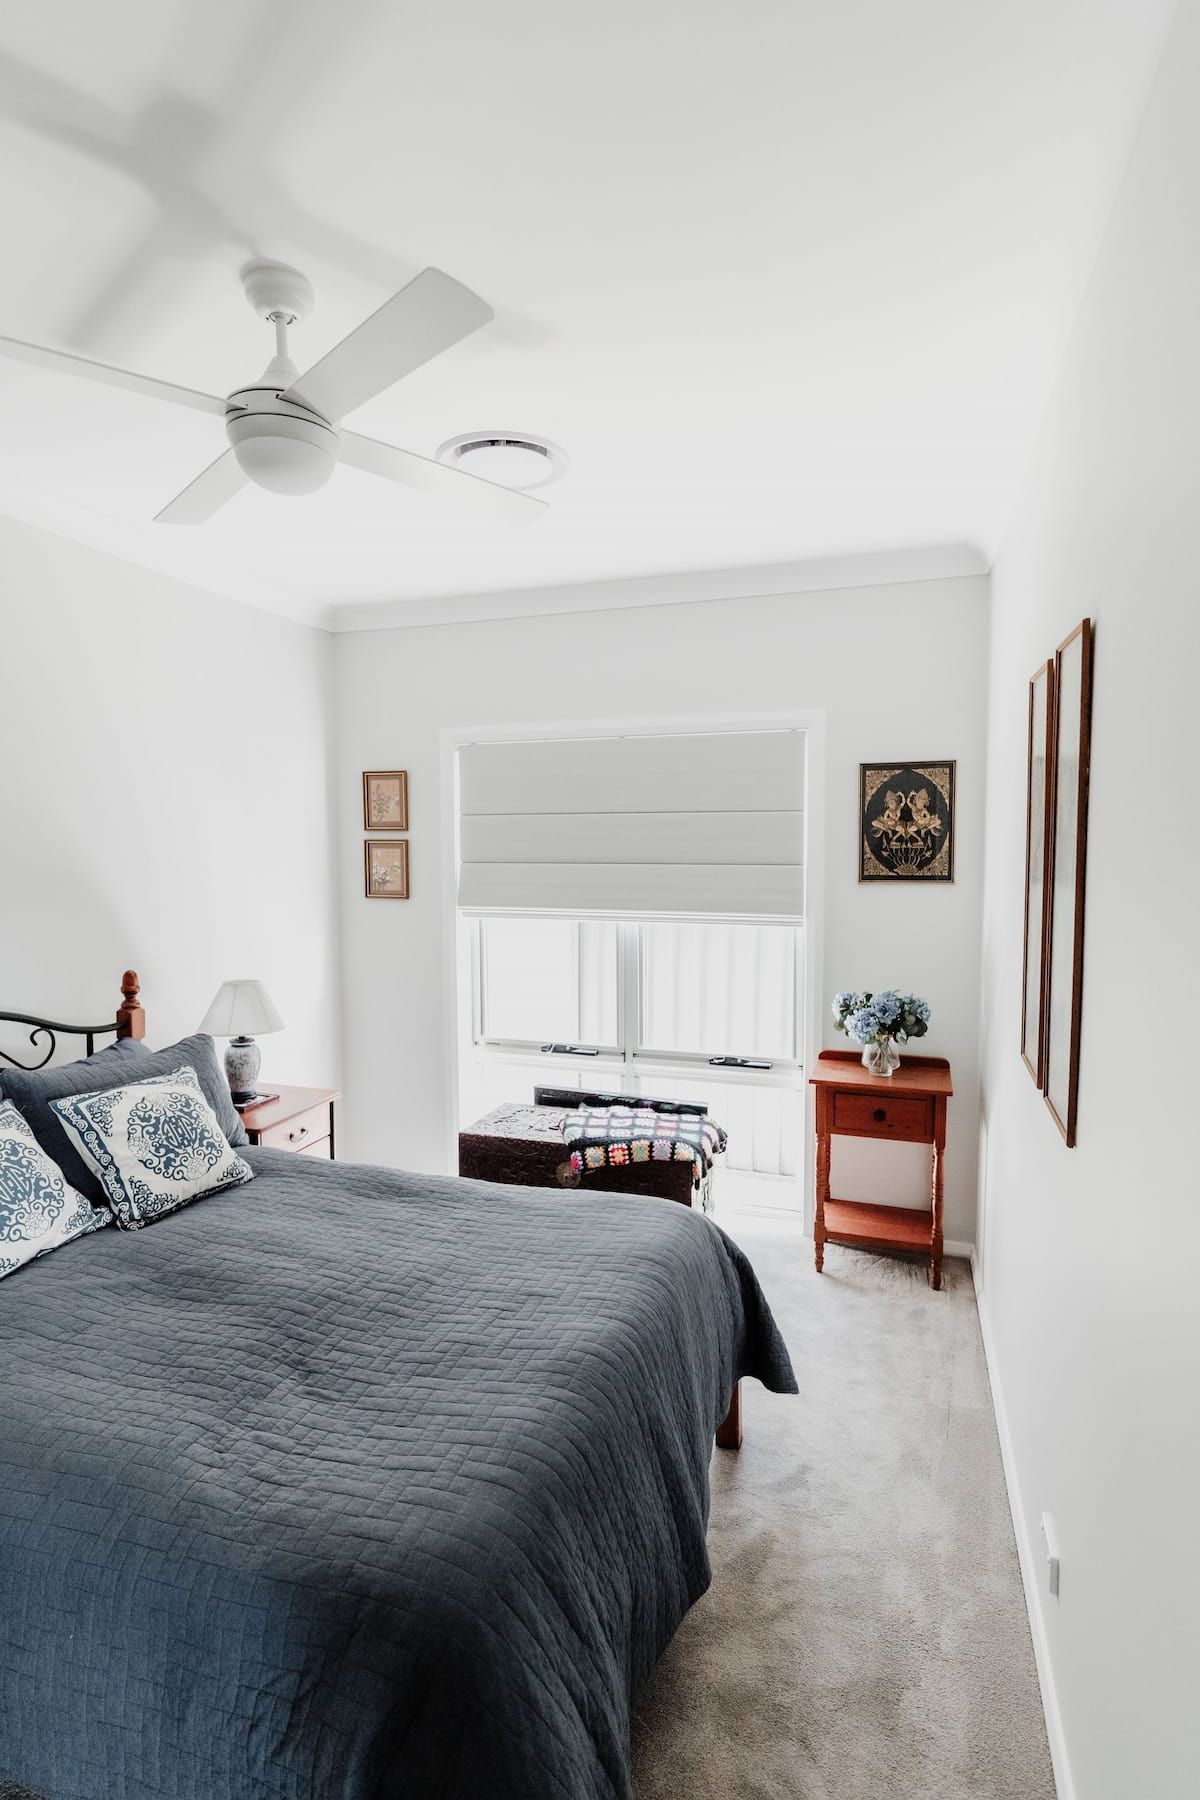 A White Bedroom with Large Bed and Window that has White Roman Blinds — New Blinds and Shutters in Maryland, NSW